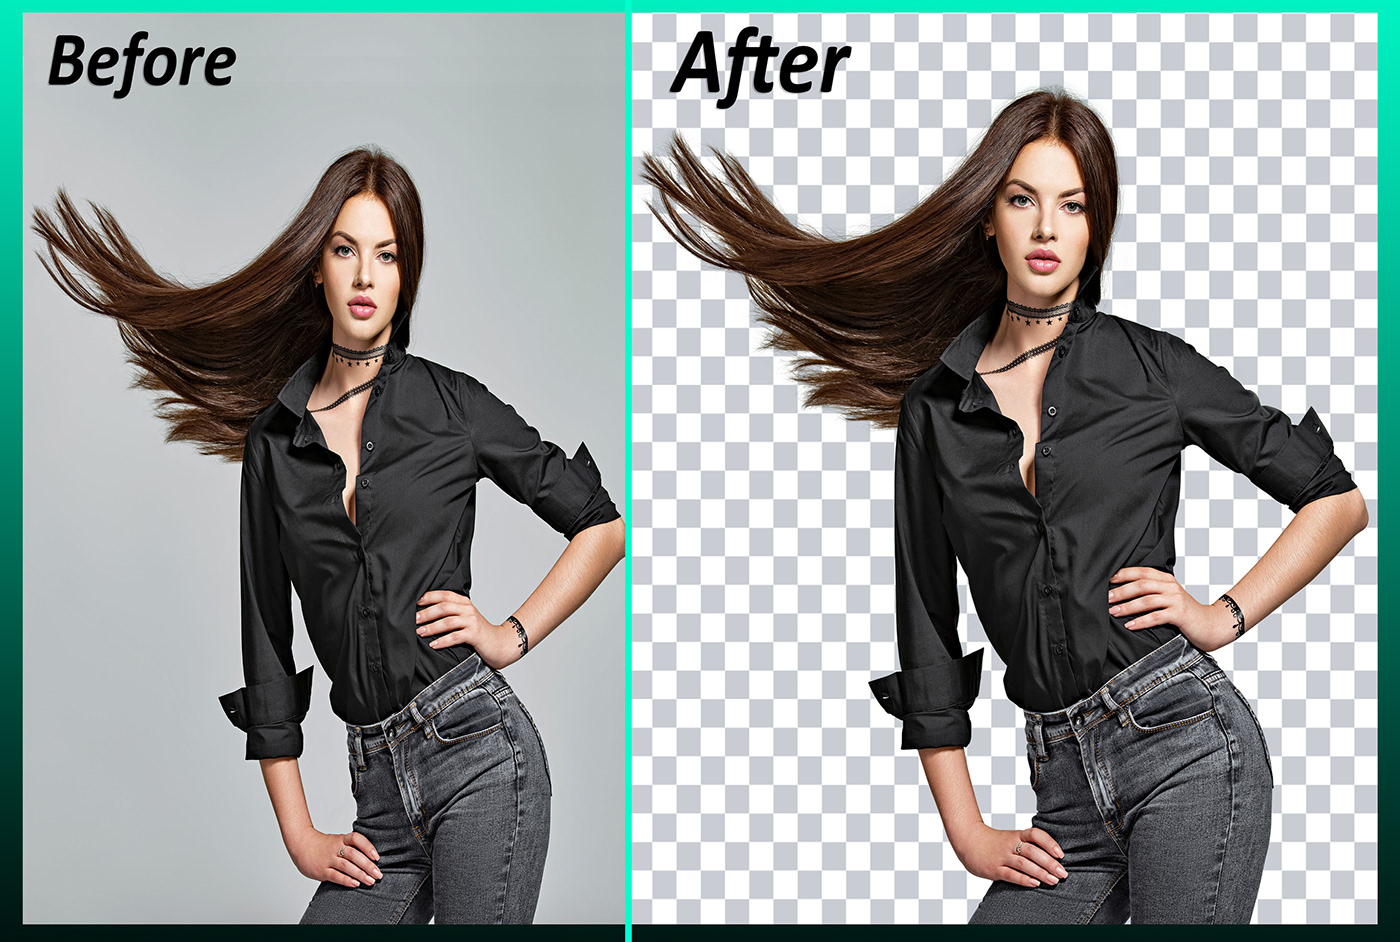 Background removal Background Remove cut out image crop object remove Photo Retouching Clipping path white background logo transparent resize